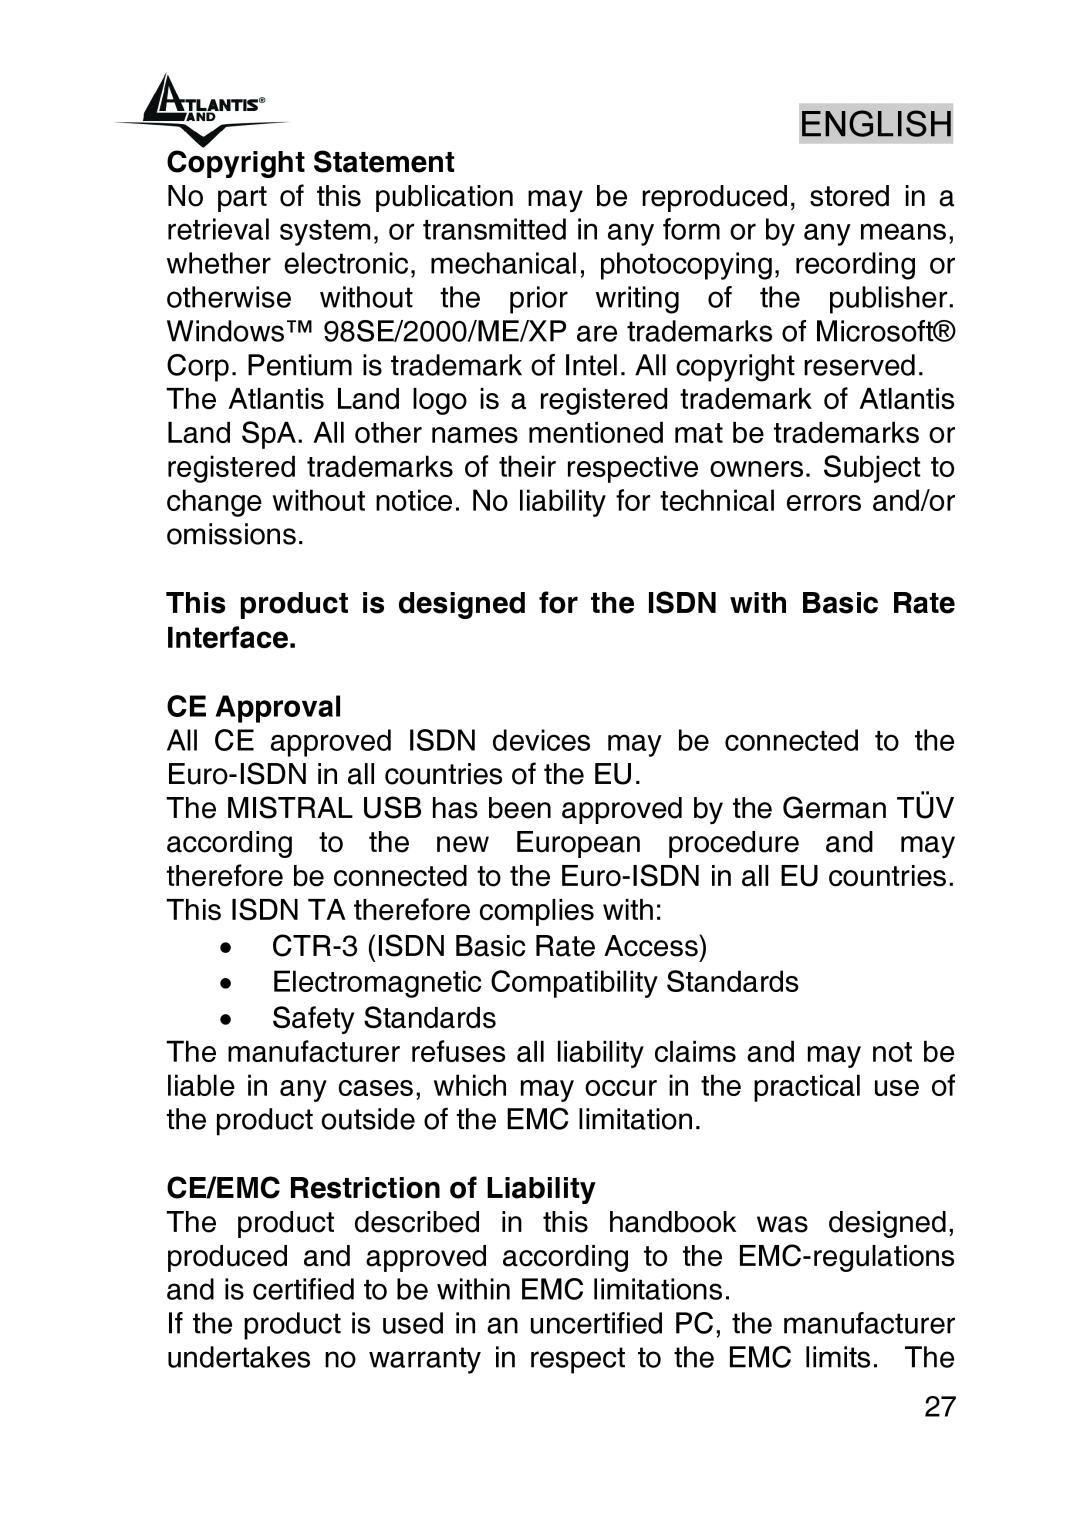 Atlantis Land A01-IU1 manual English, Copyright Statement, This product is designed for the ISDN with Basic Rate Interface 